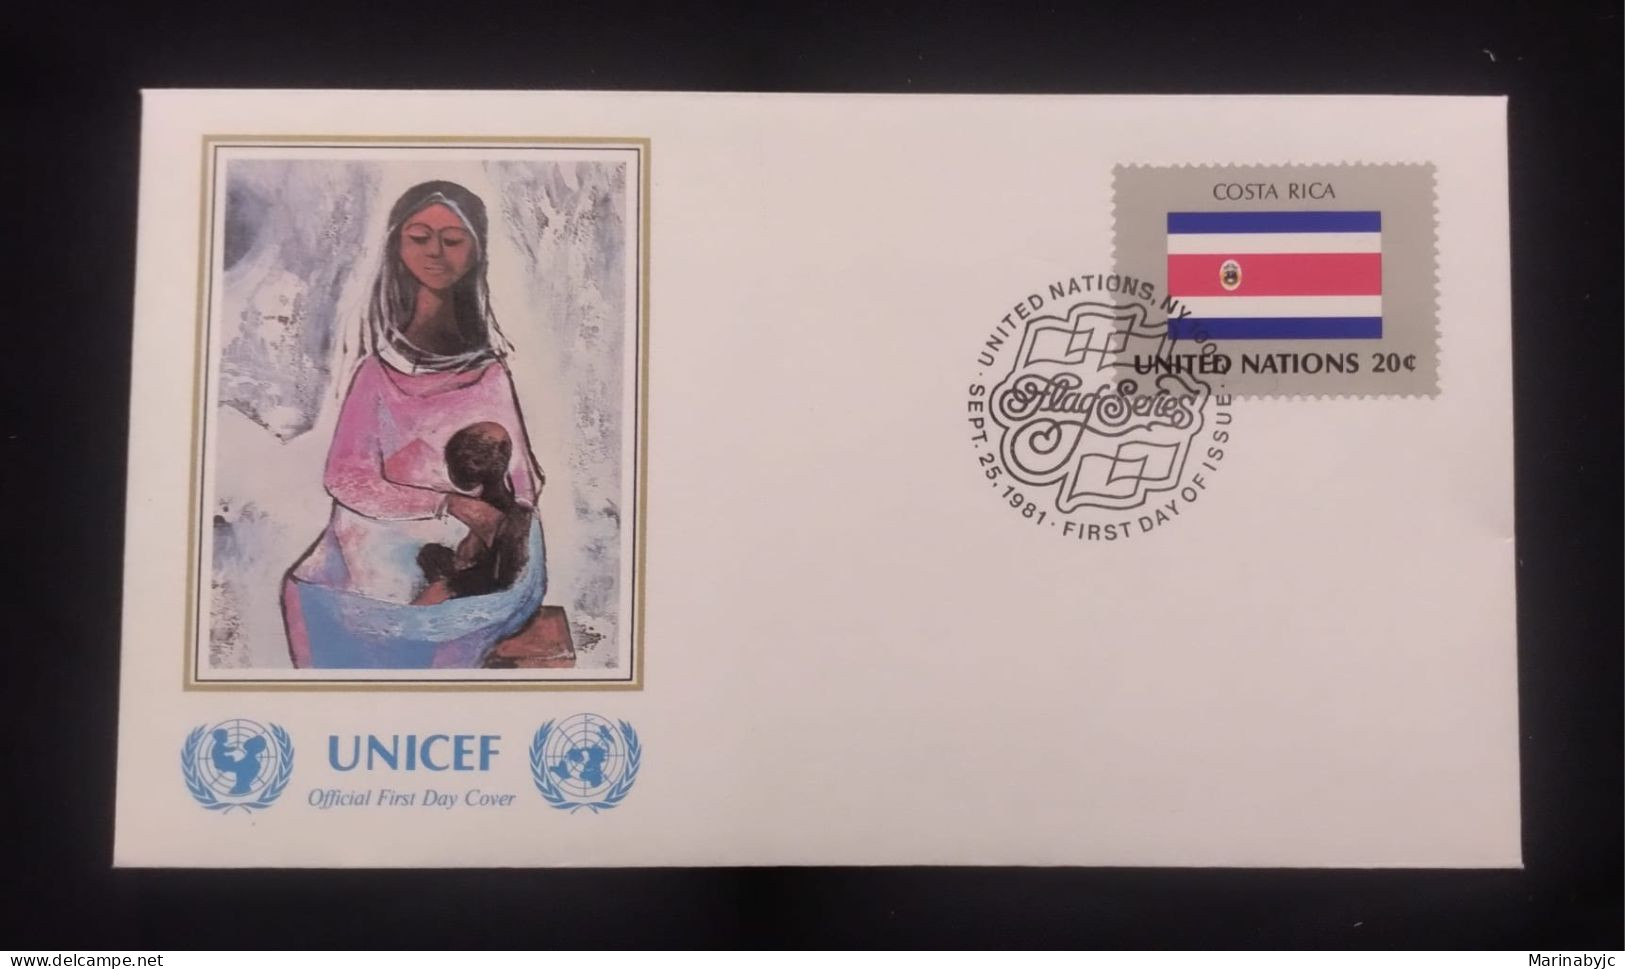 EL)1980 UNITED NATIONS, NATIONAL FLAG OF THE MEMBER COUNTRIES, COSTA RICA, ART - MOTHER AND CHILD PAINTING, UNICEF, FDC - Nuovi